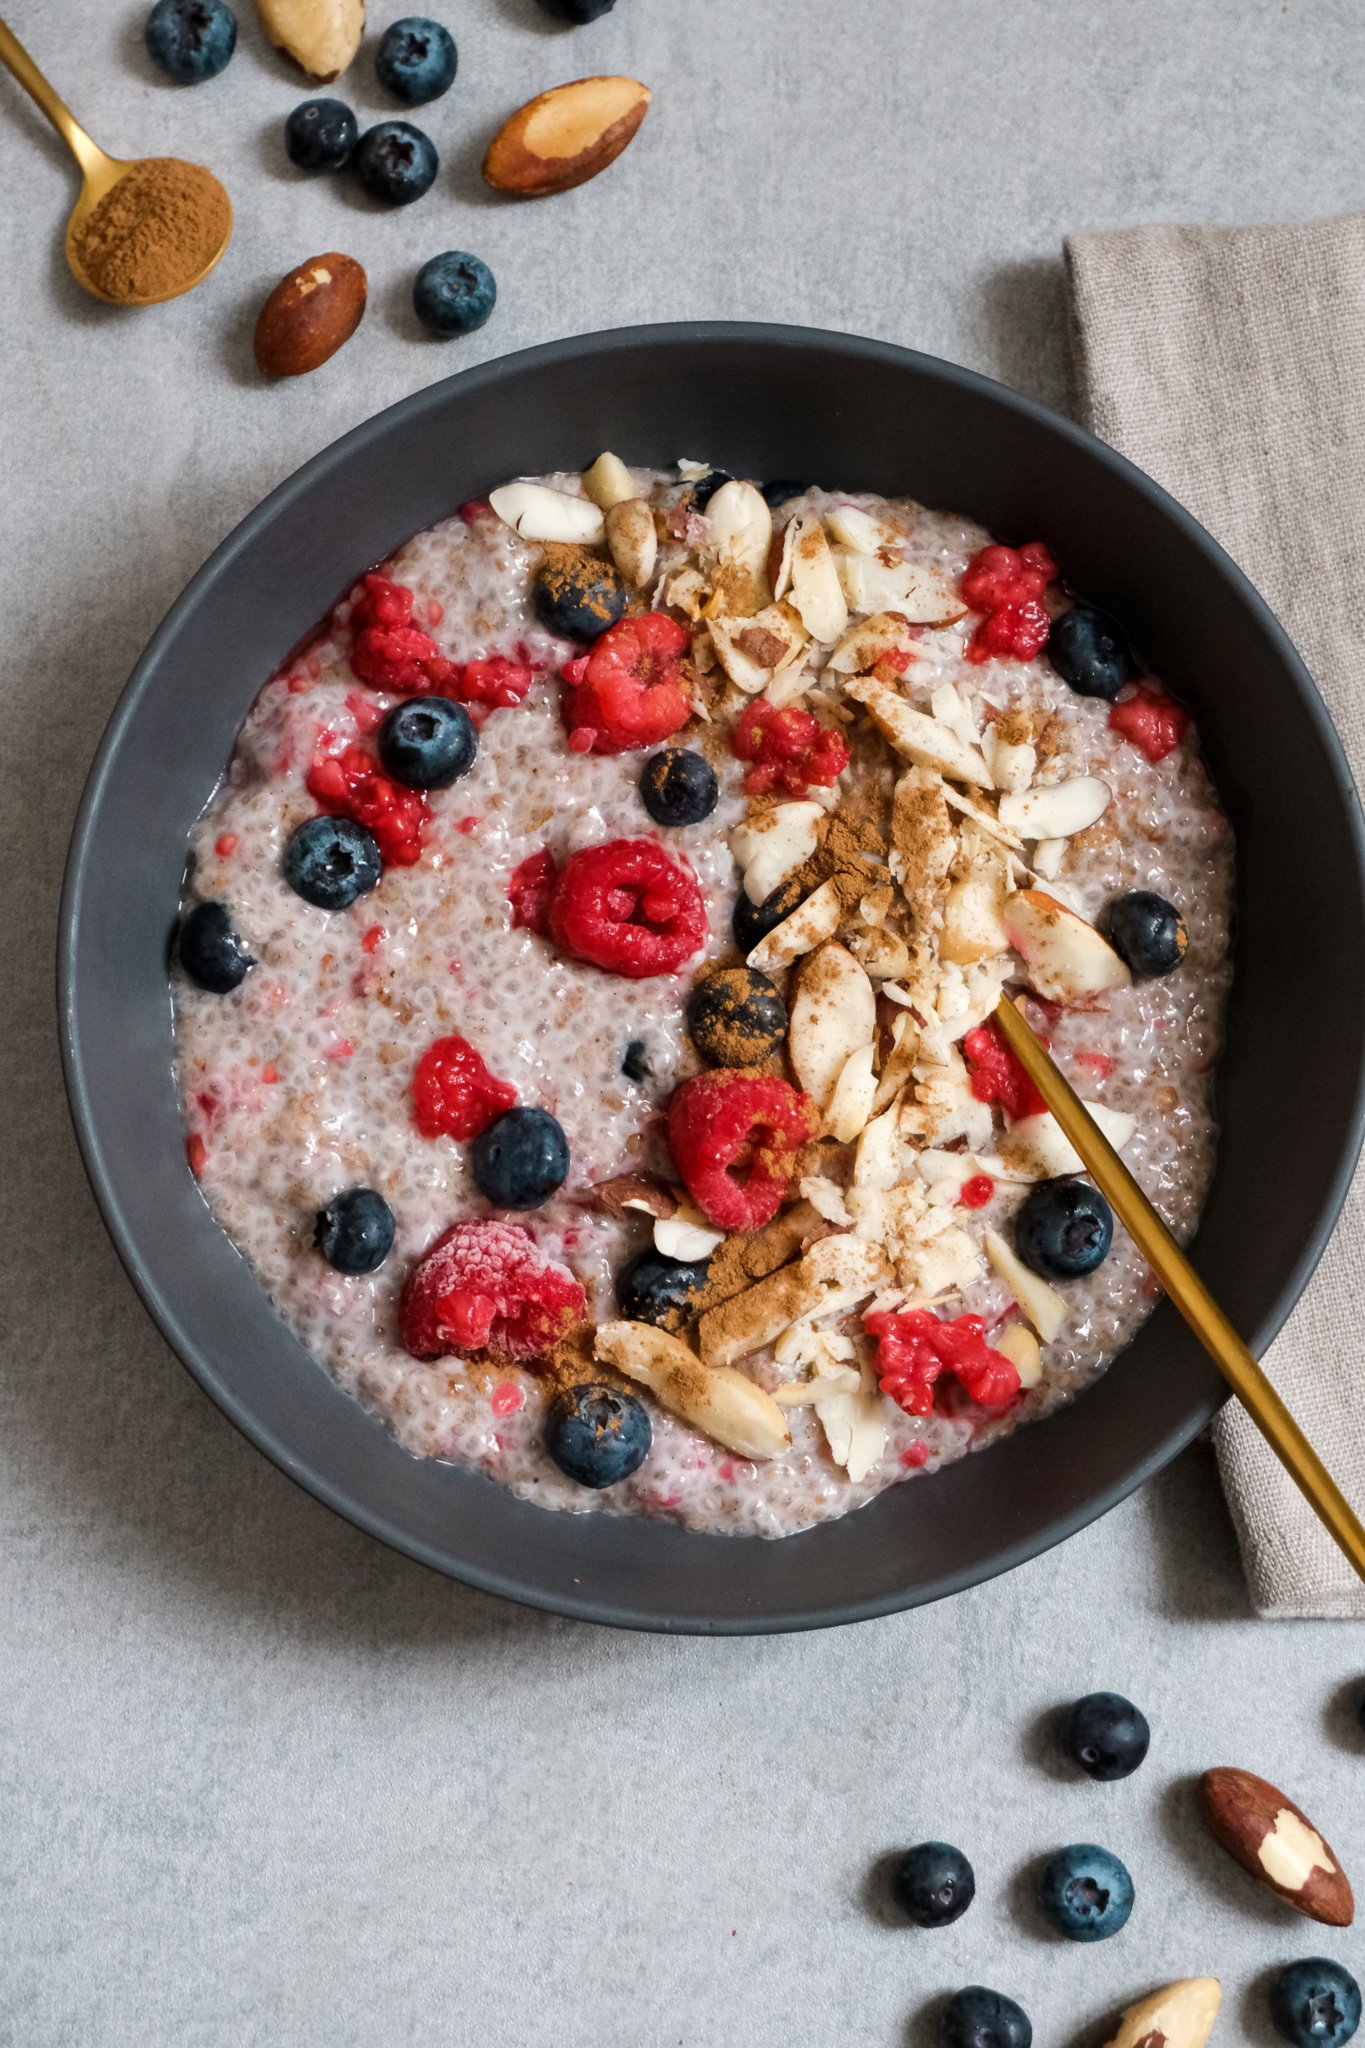 CHIA PUDDING WITH BRAZIL NUTS AND BERRIES — MAGDA MAG DAS